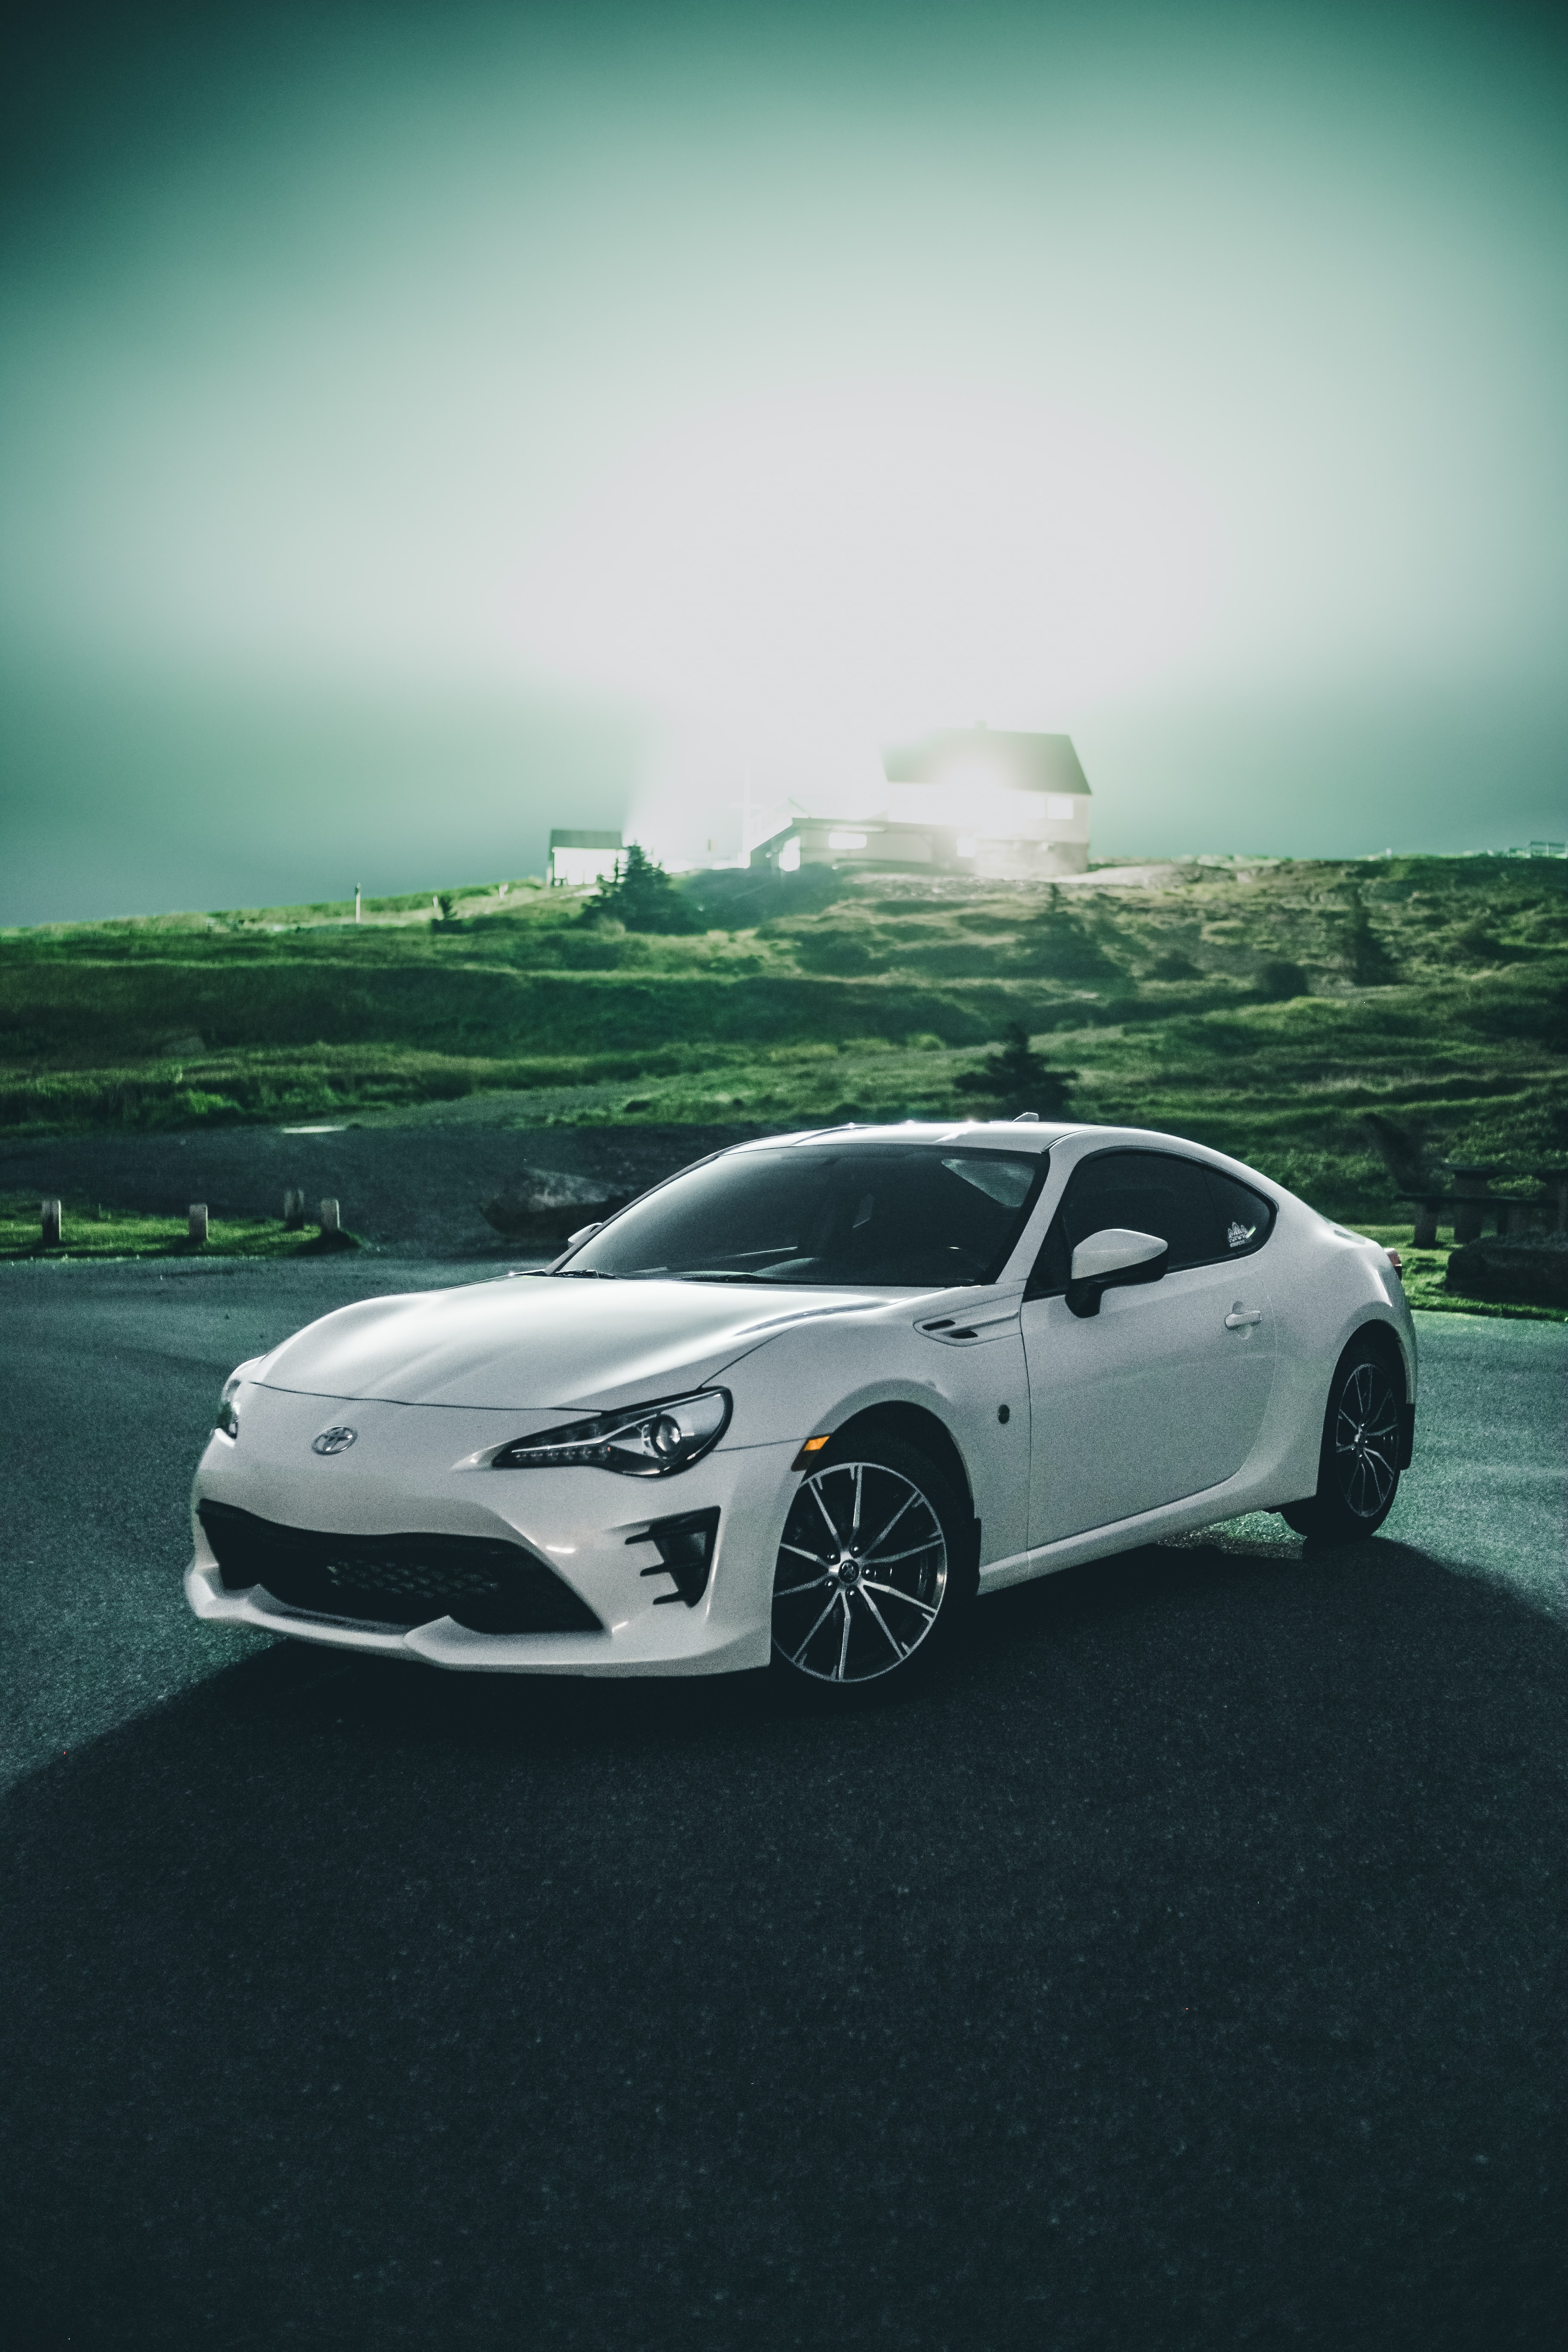 toyota, cars, sports car, sports, white, car, side view phone background